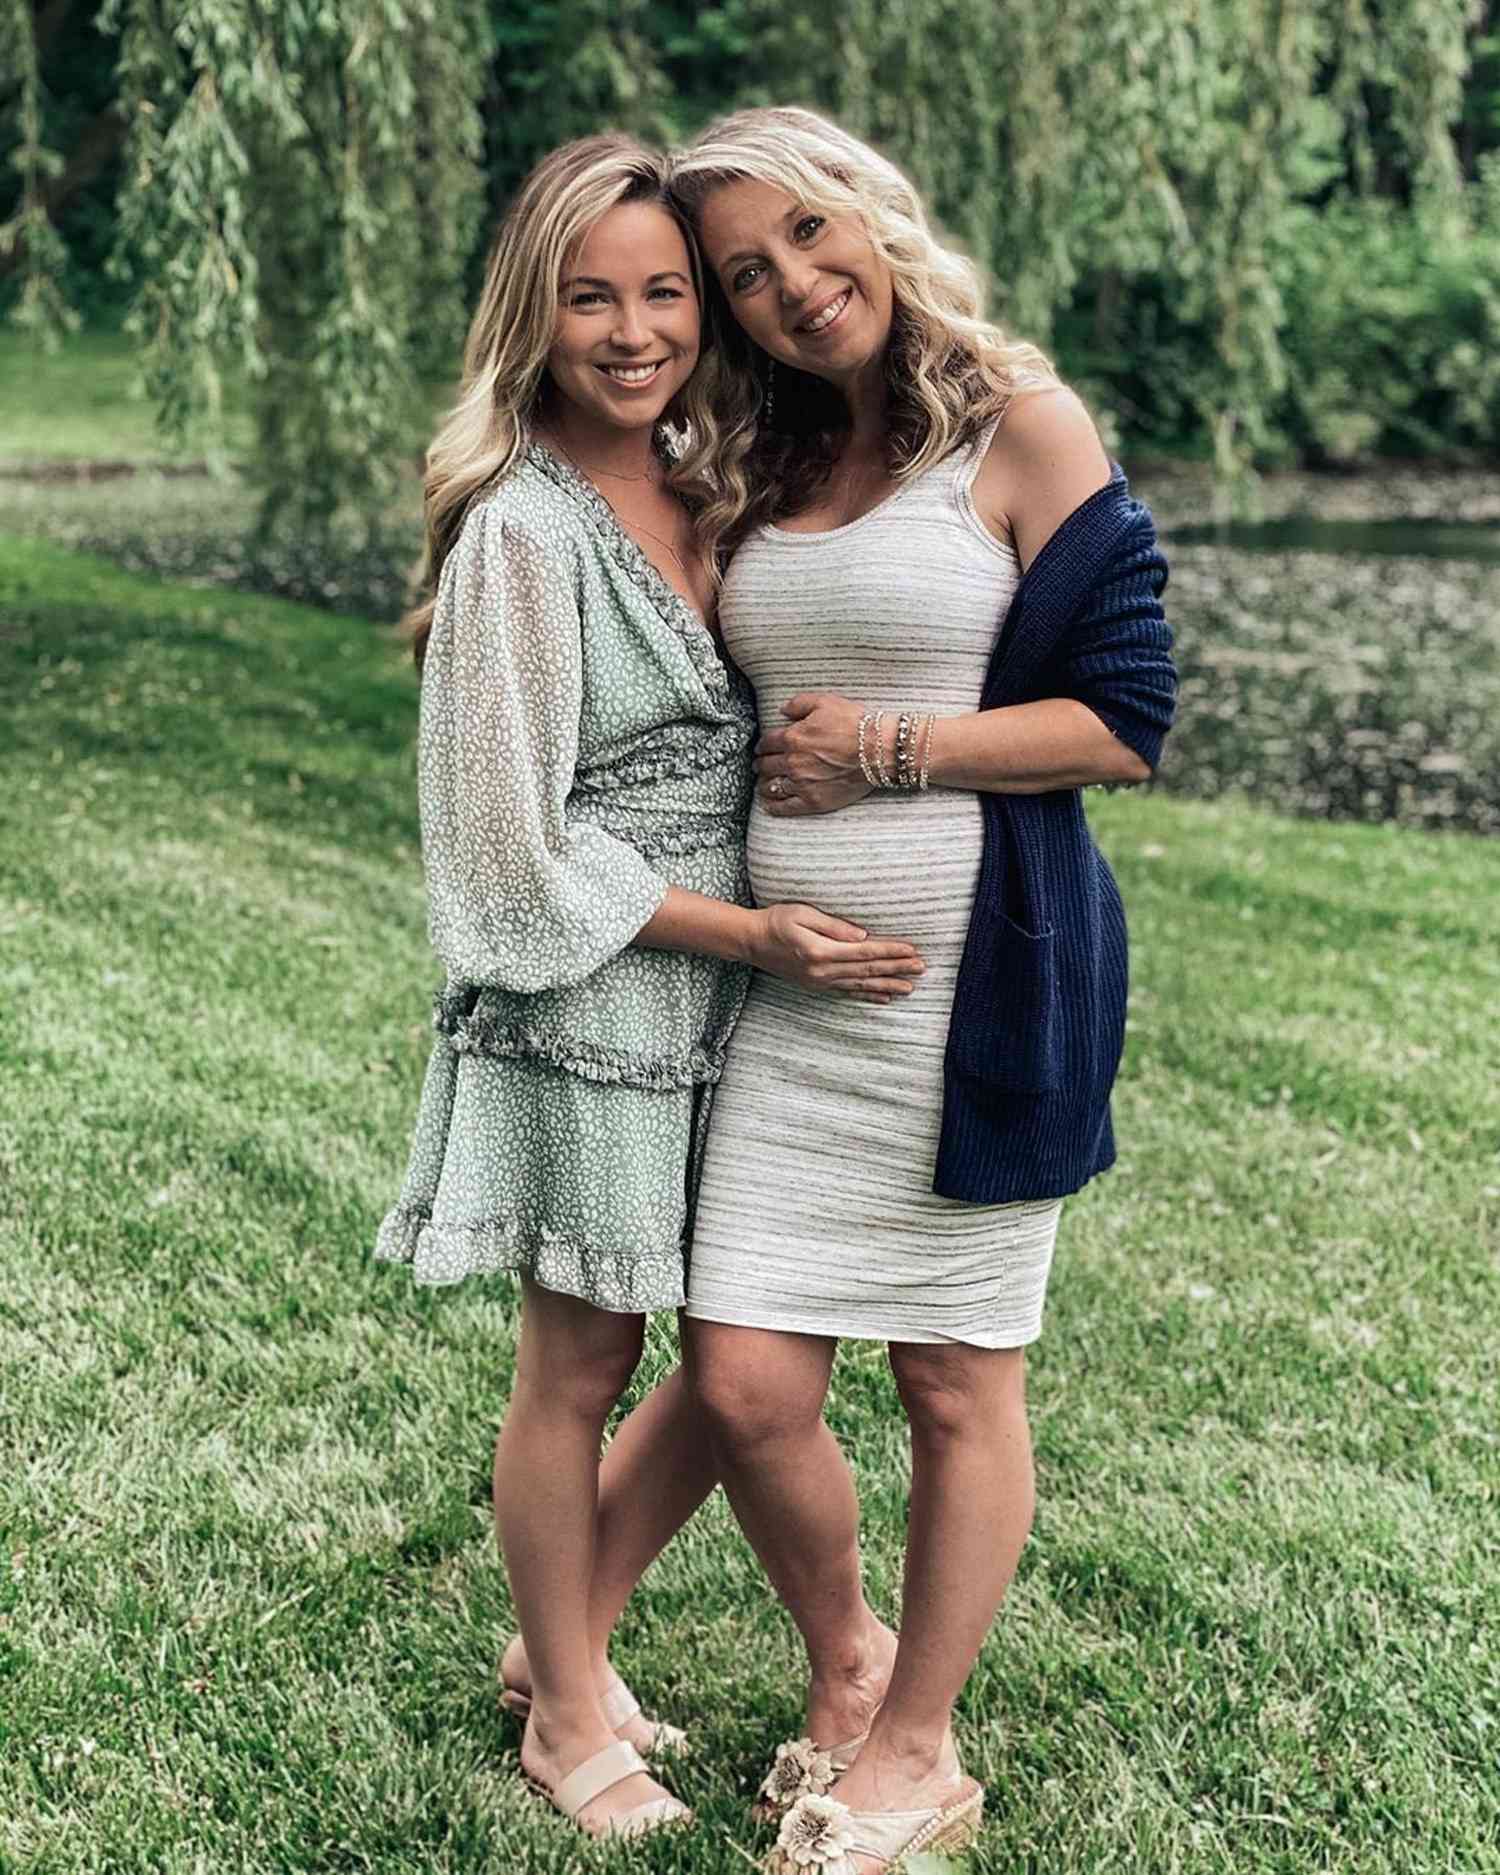 51-Year-Old Mother Serves as Her Daughter's Surrogate After She Is Una...